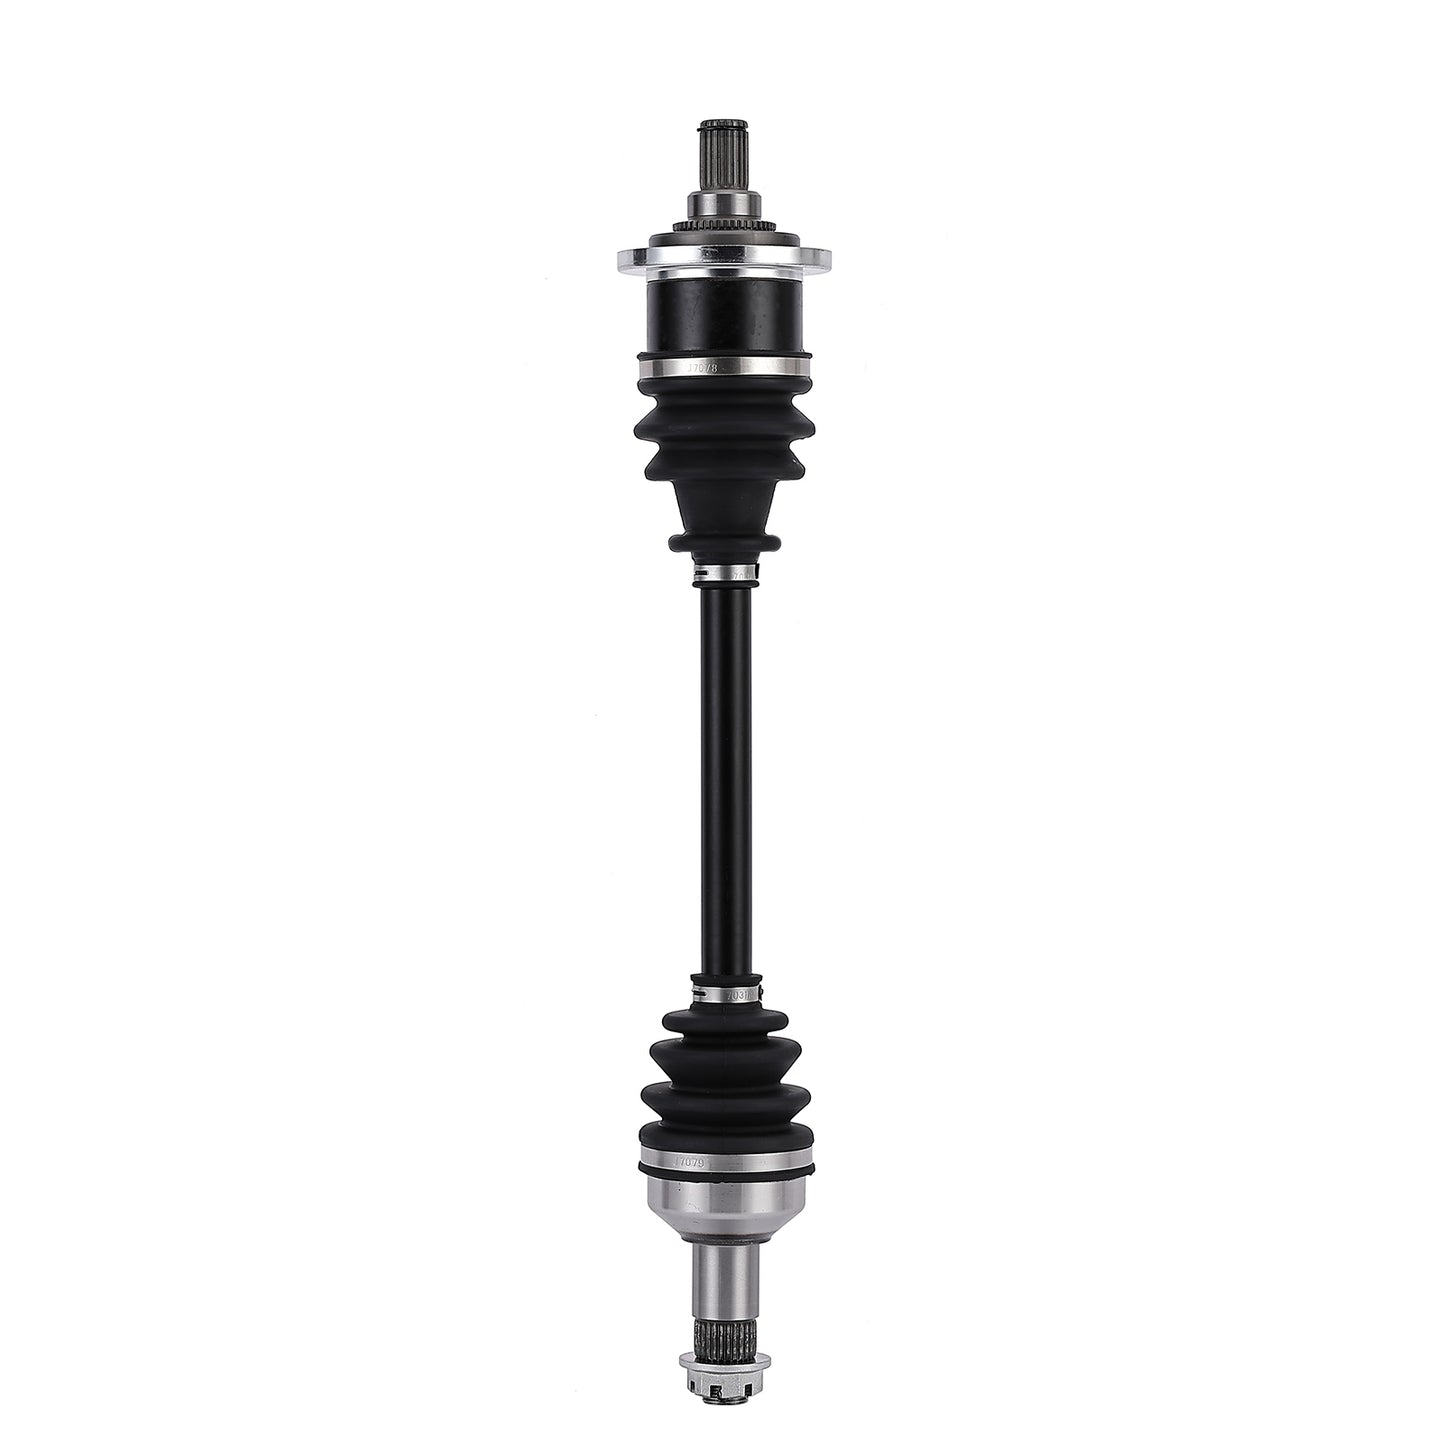 1 CAM-AC110 and 1 CAM-AC210 Front Left Drive Shaft CV Axle for 2005 ARCTIC CAT 400 0502-547, 0502-542, 1502-539 (4x4)